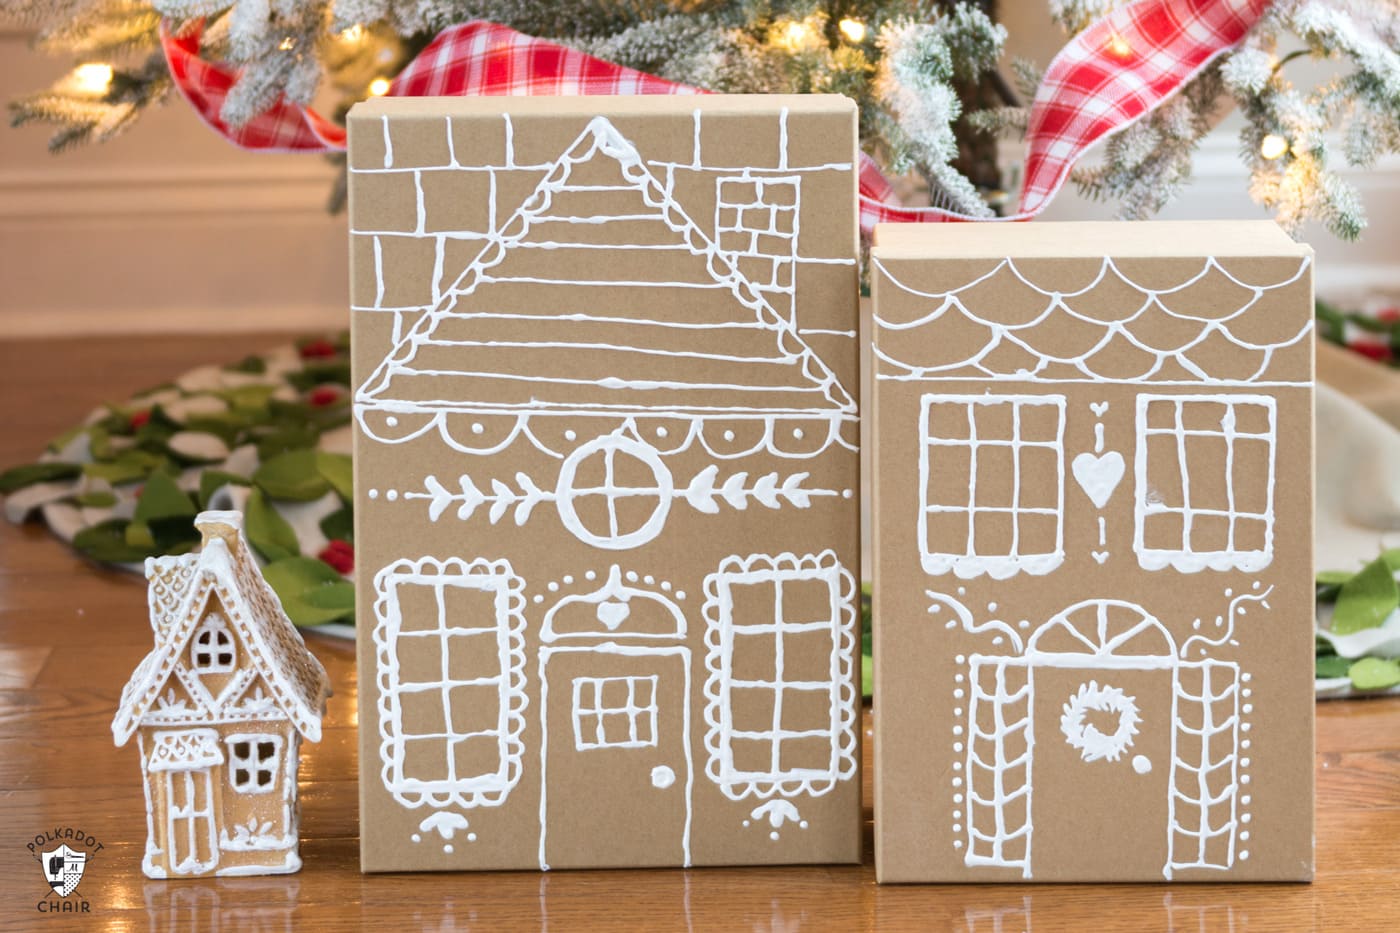 Gingerbread house paper gift boxes in front of the Christmas tree